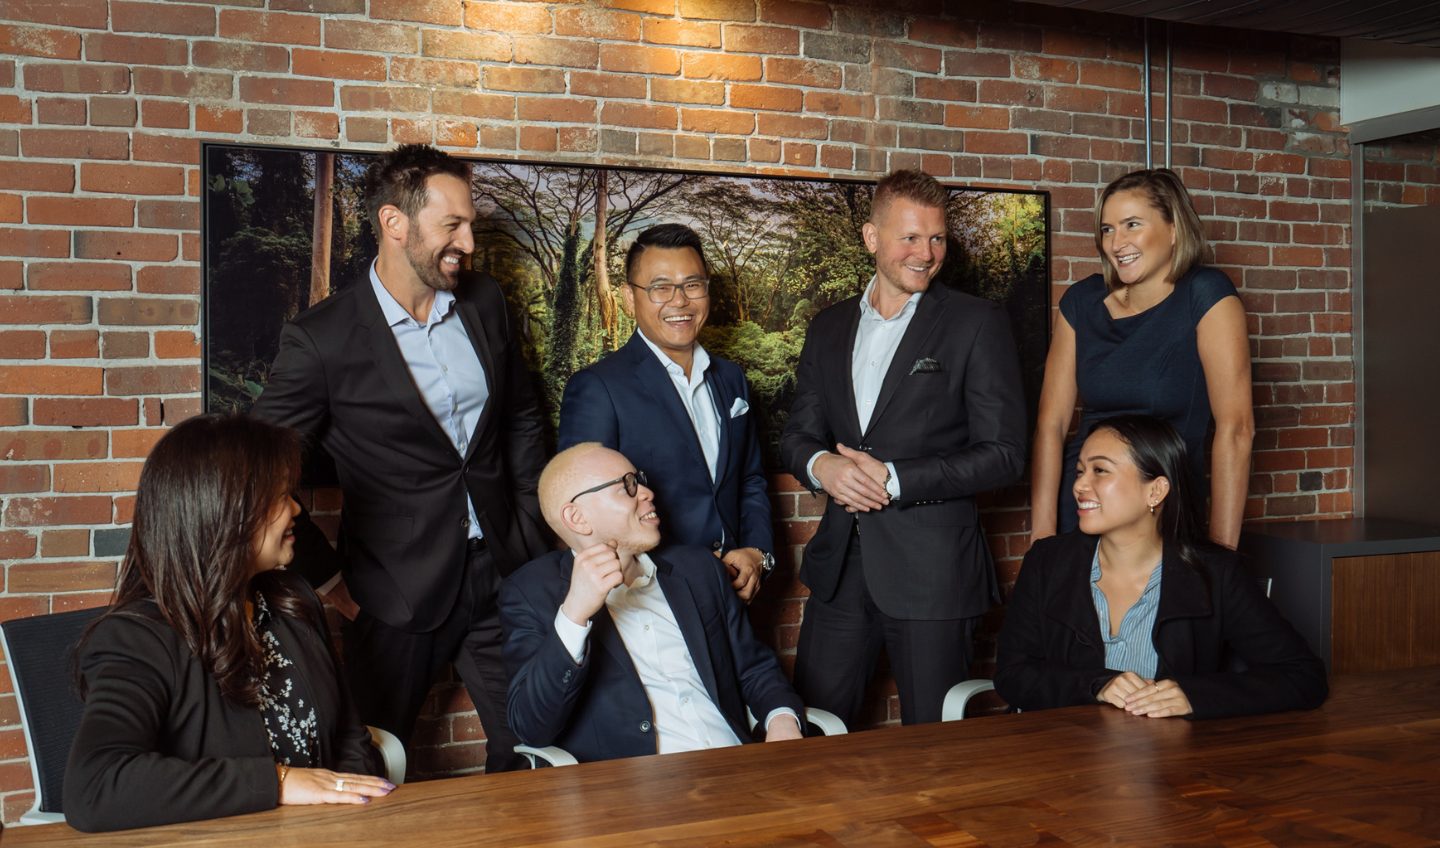 Financial firm team photos with colleagues smiling at each other